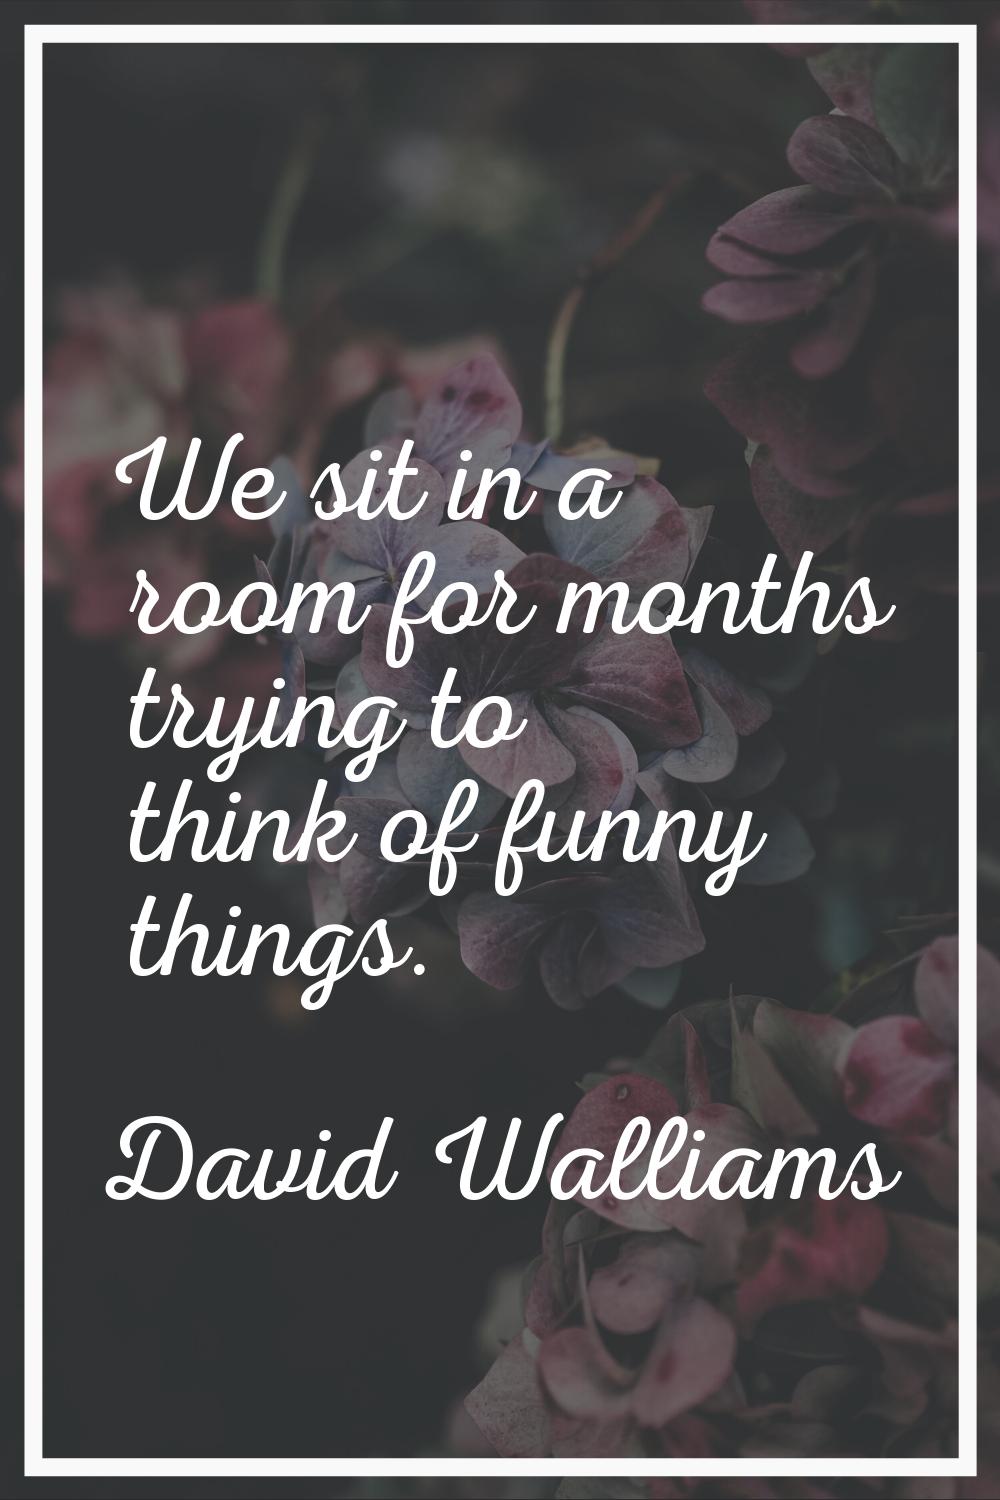 We sit in a room for months trying to think of funny things.